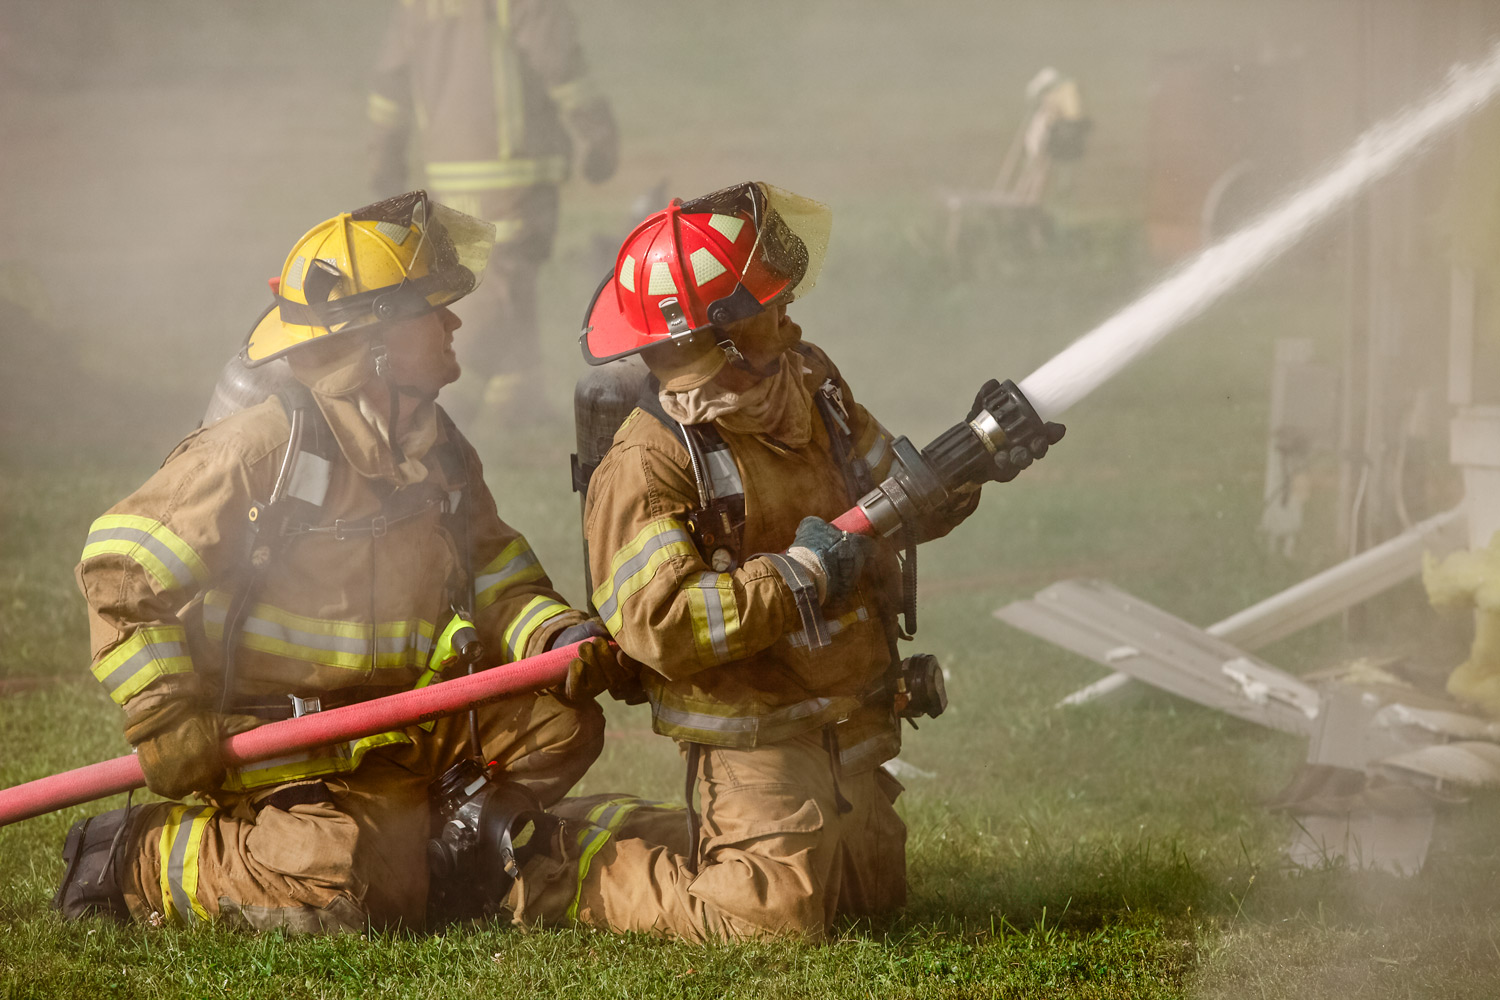 20+ photos of fighting fires